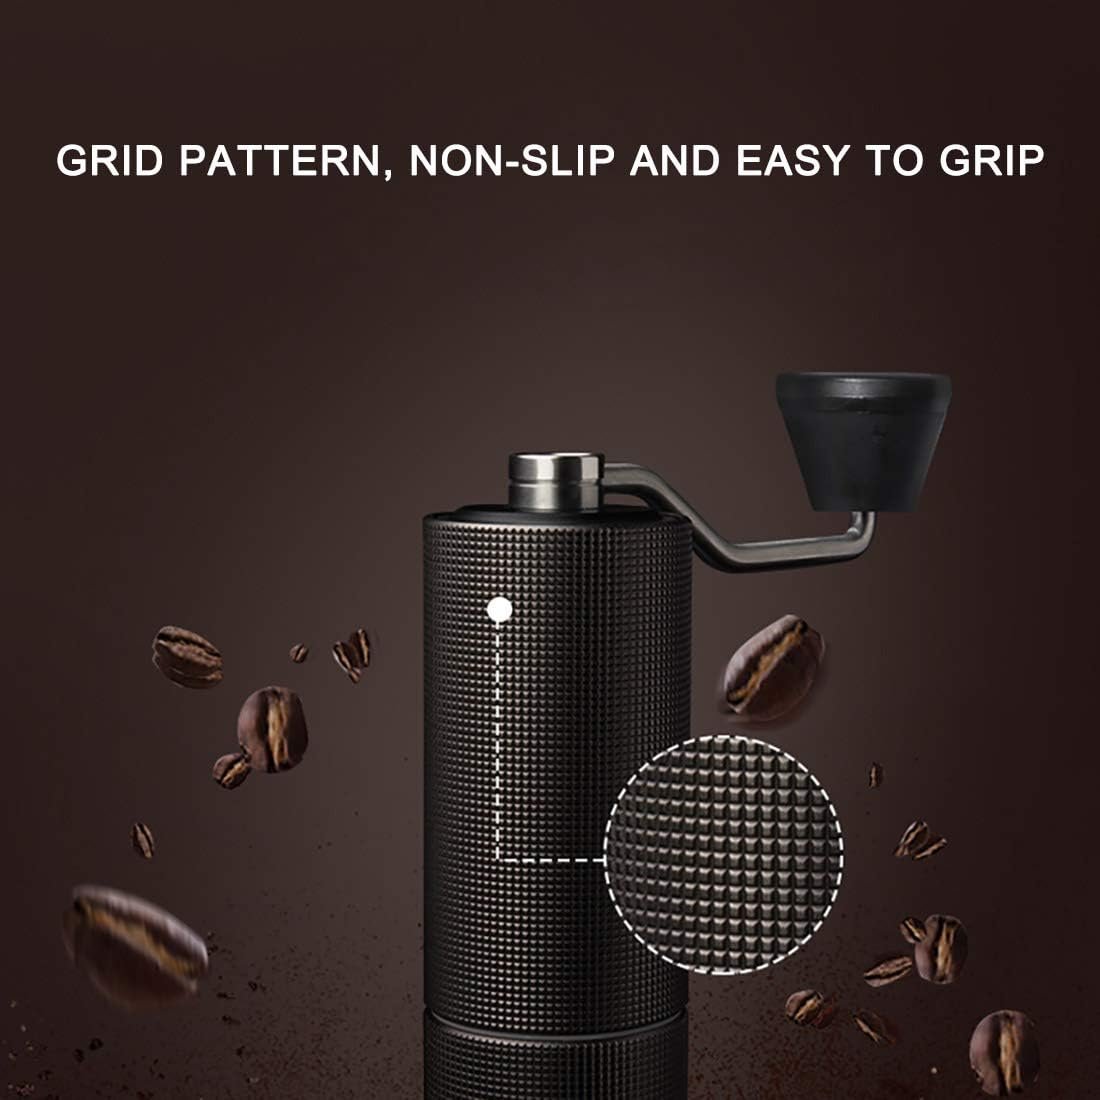 5 C2 Manual Coffee Grinder by TIMEMORE with Stainless Steel Conical Burr